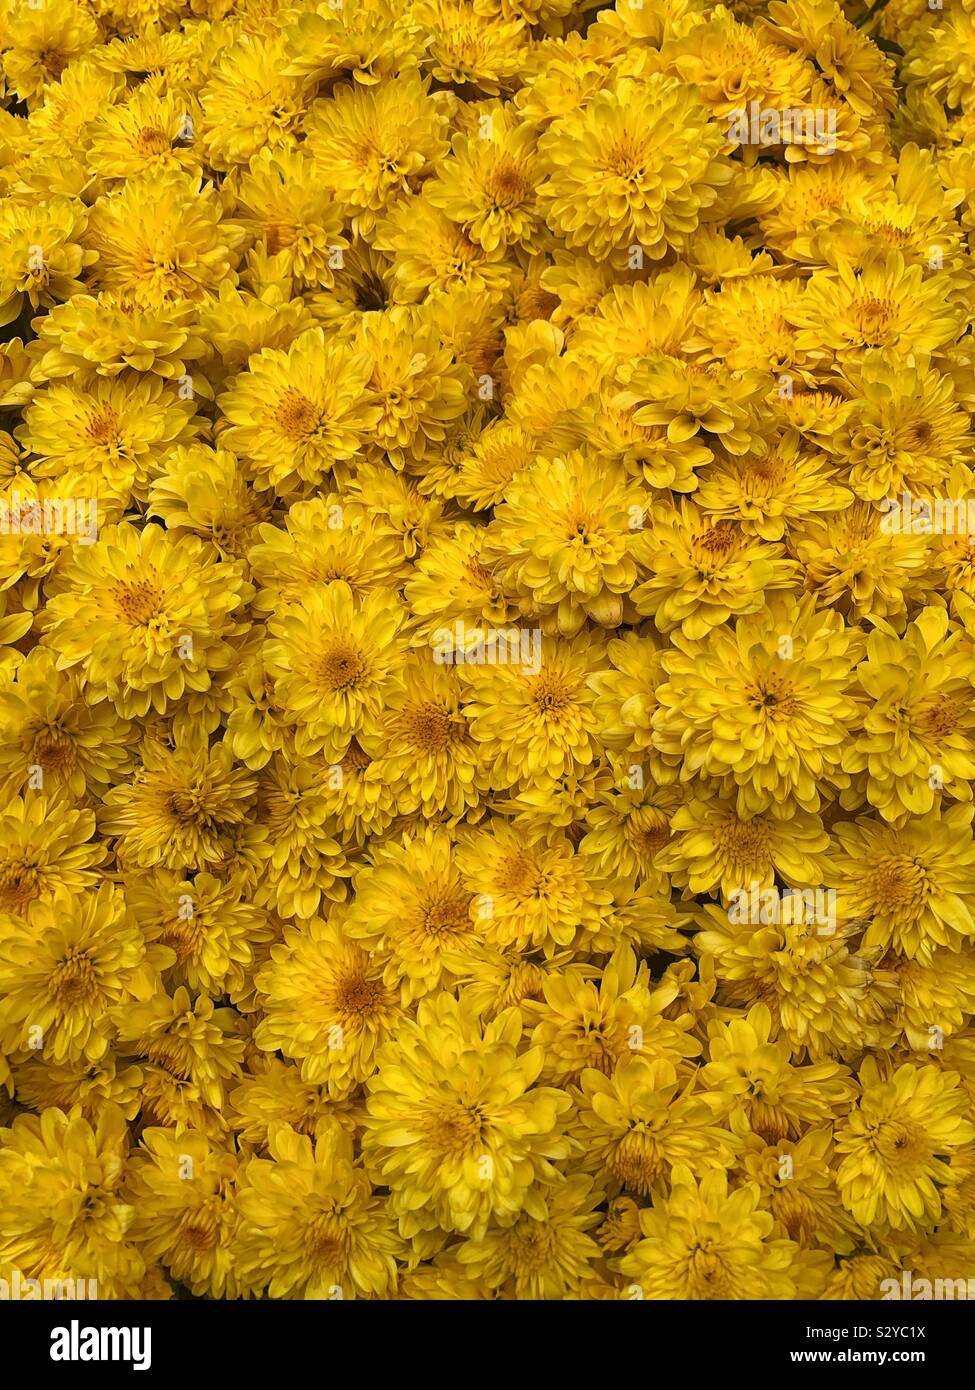 Bel giallo mamme blossoms Foto Stock